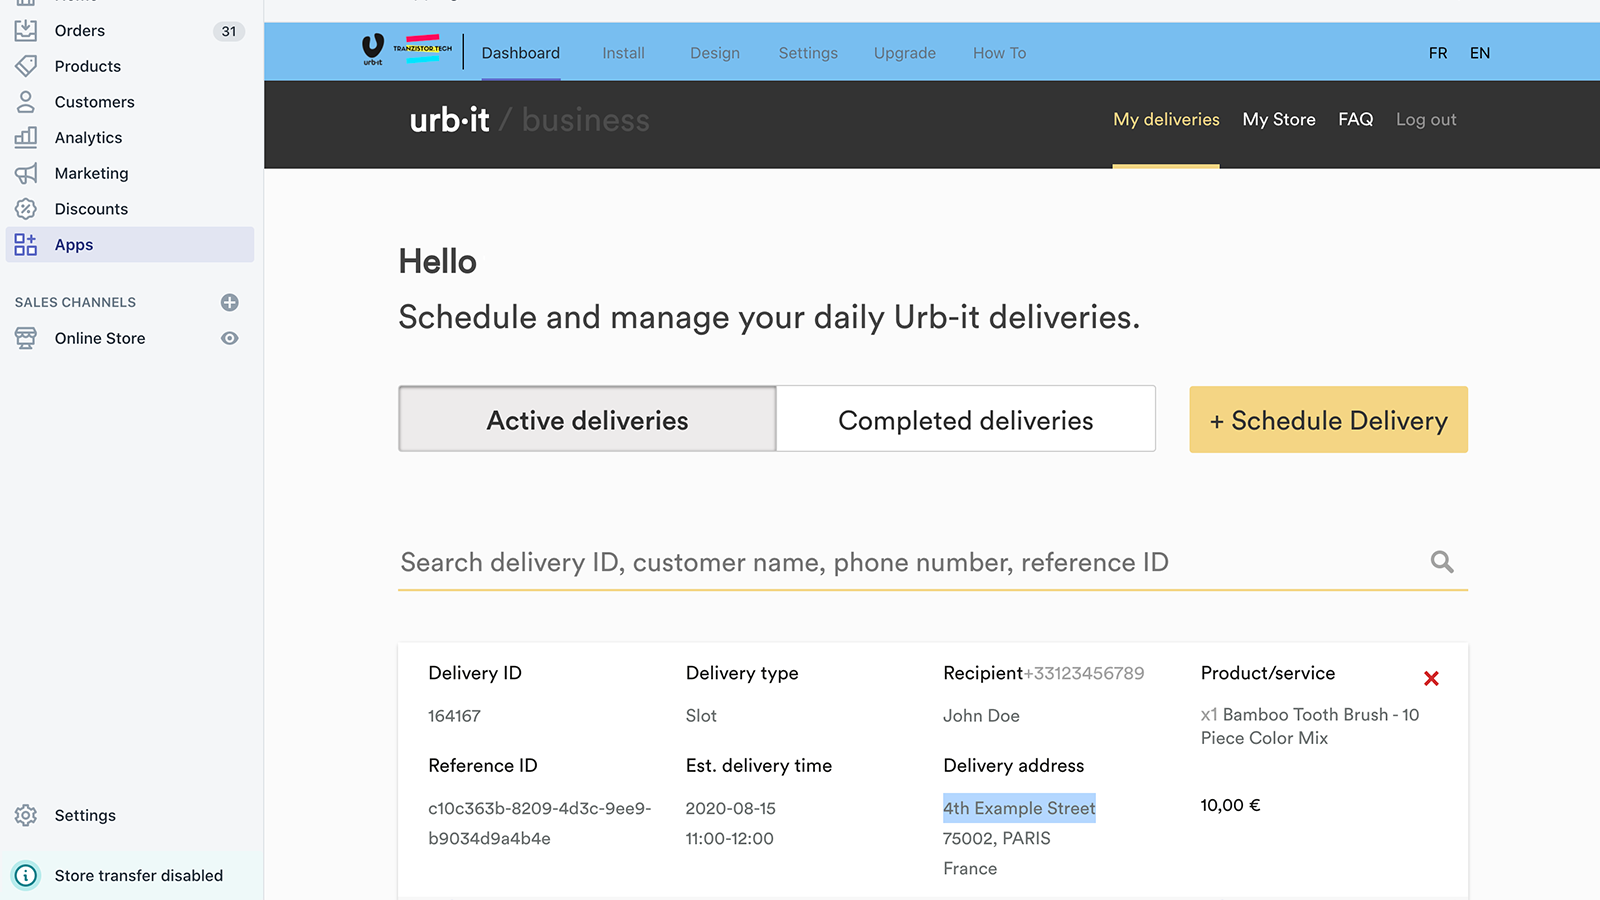 urb-it dashboard - manage your deliveries